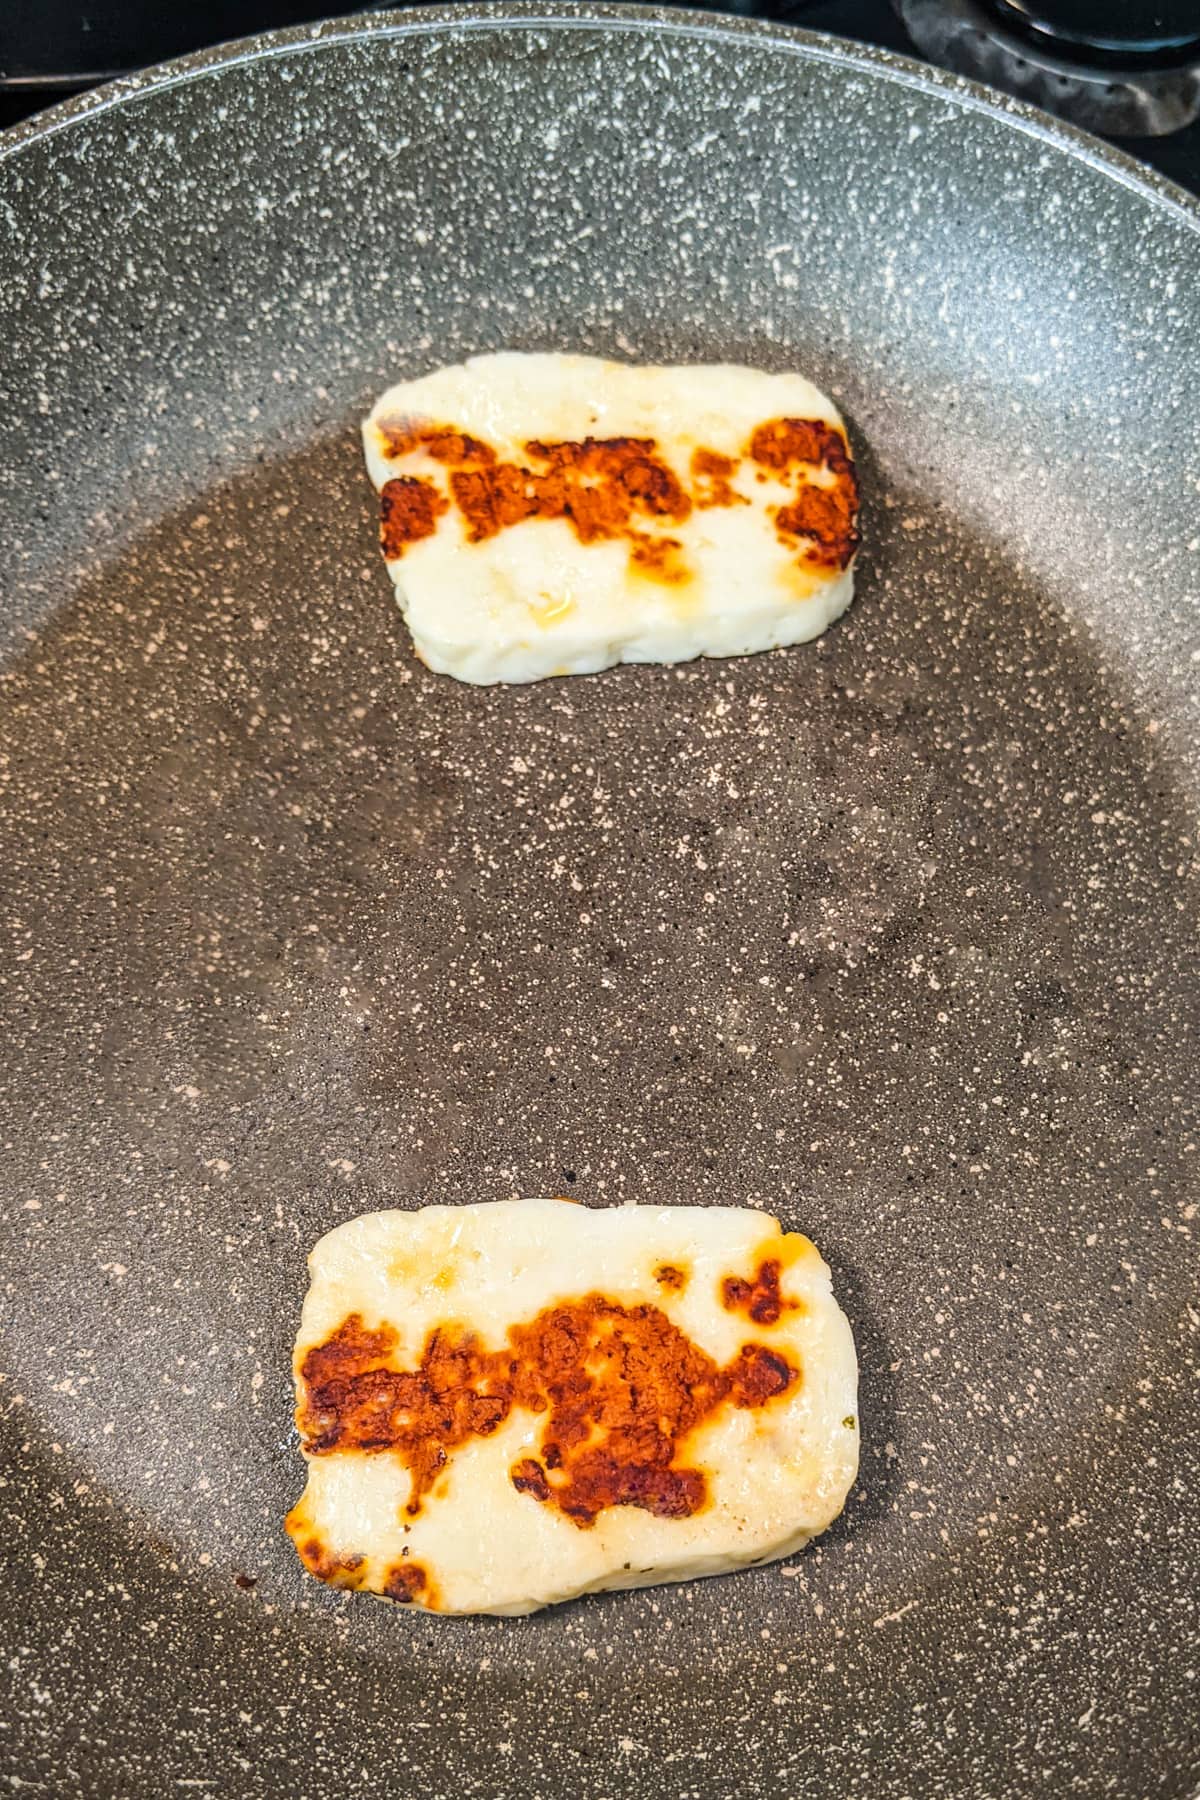 Frying two pieces of halloumi cheese on a frying pan on the stove.